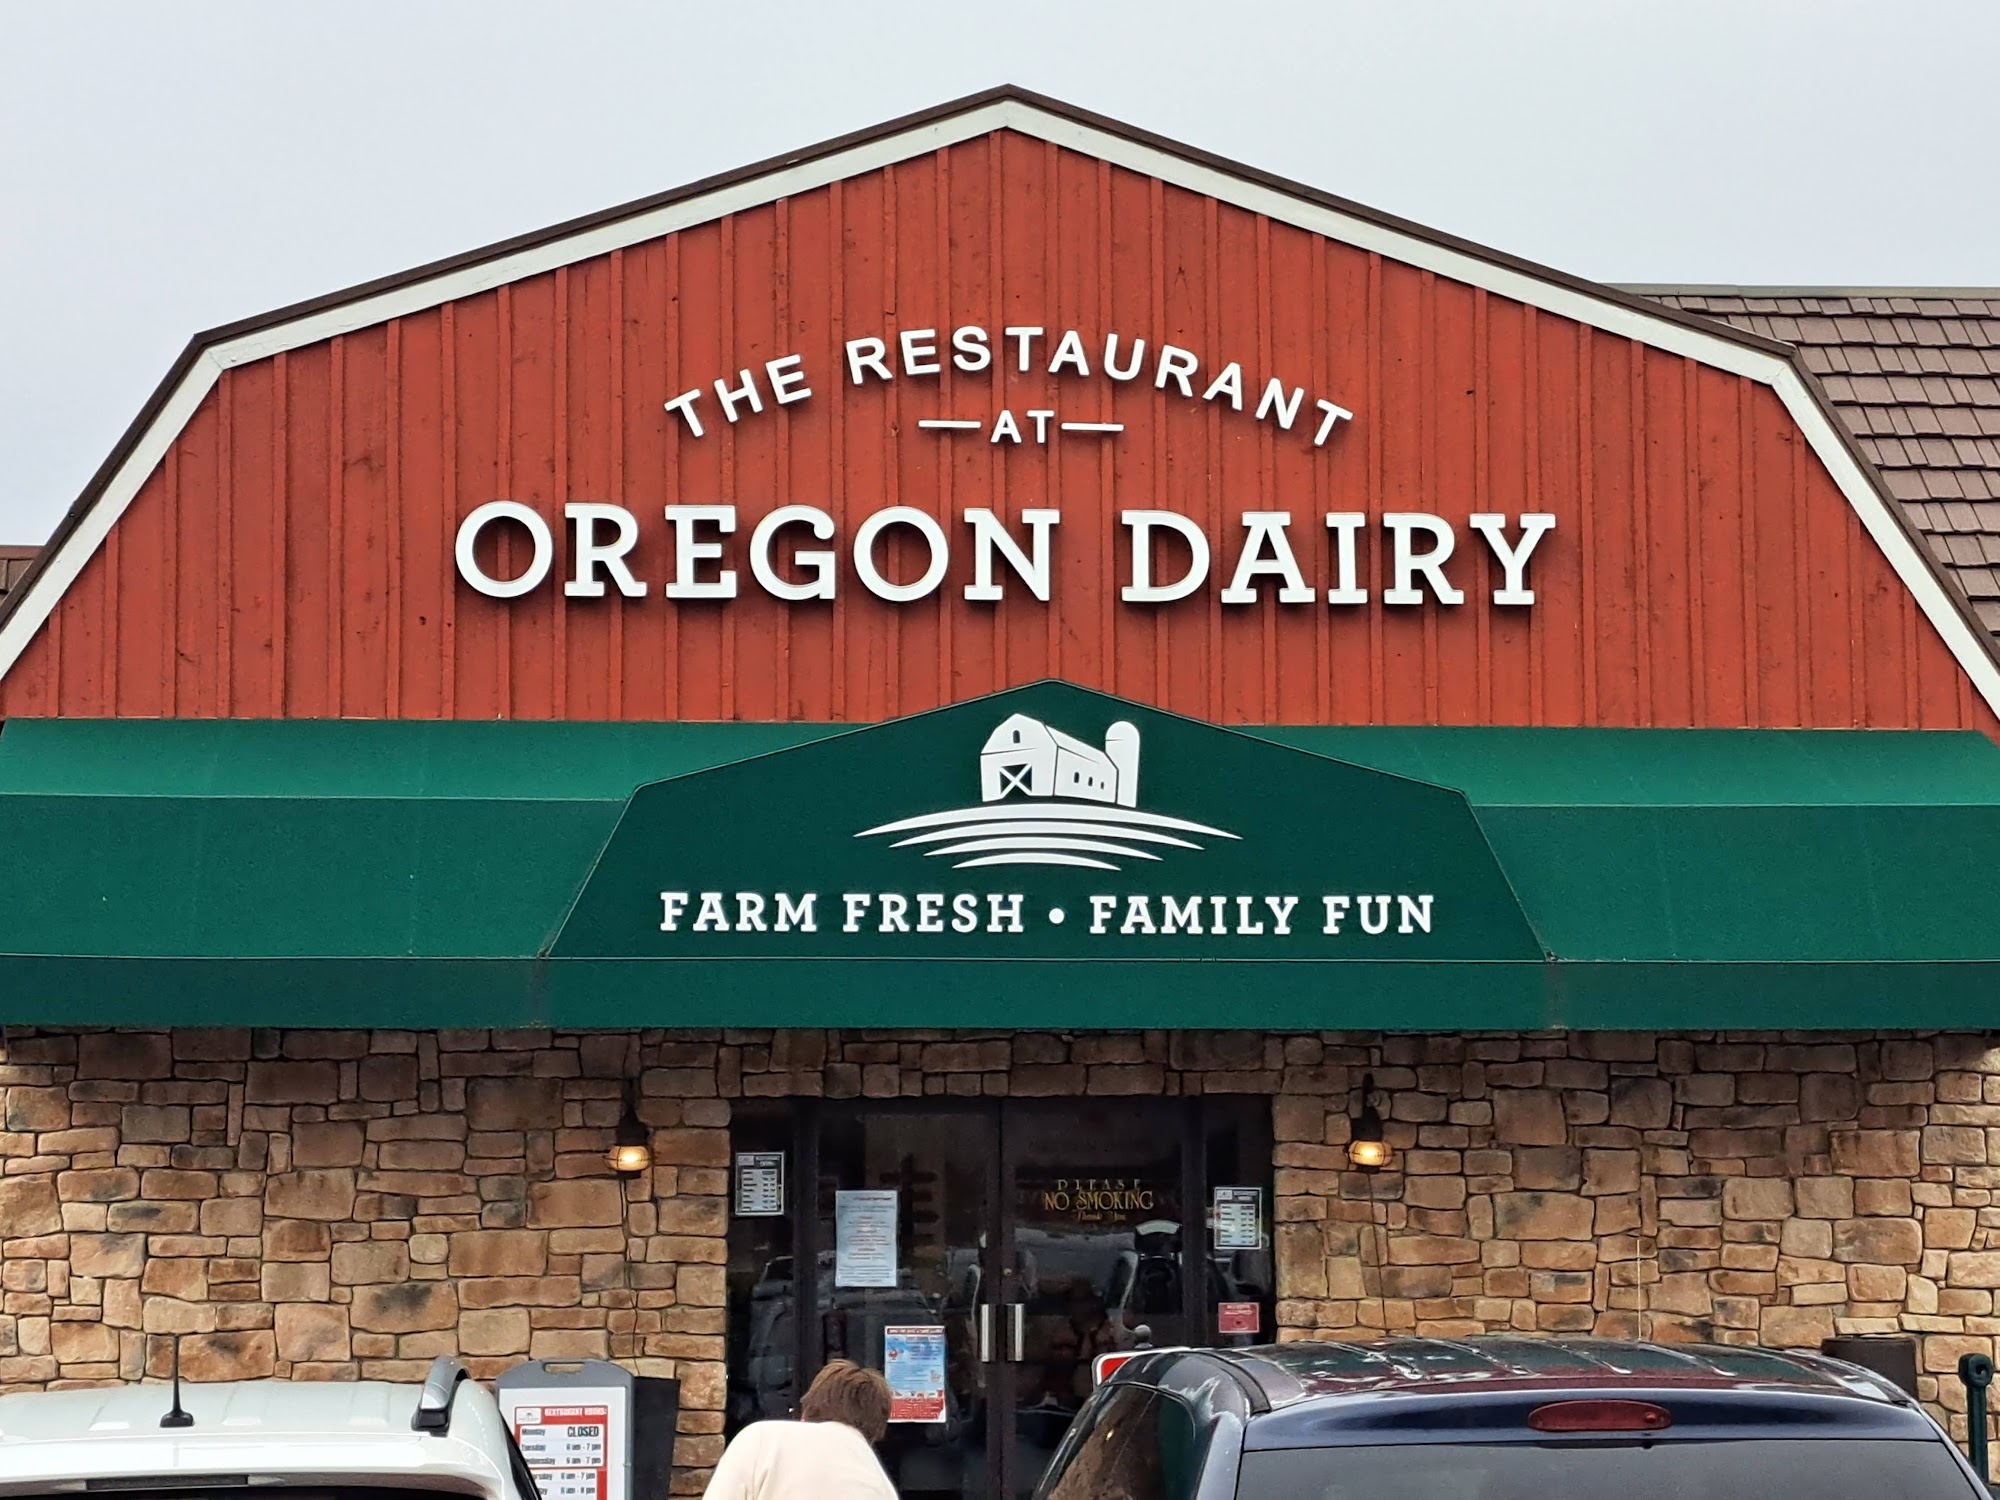 The Restaurant at Oregon Dairy